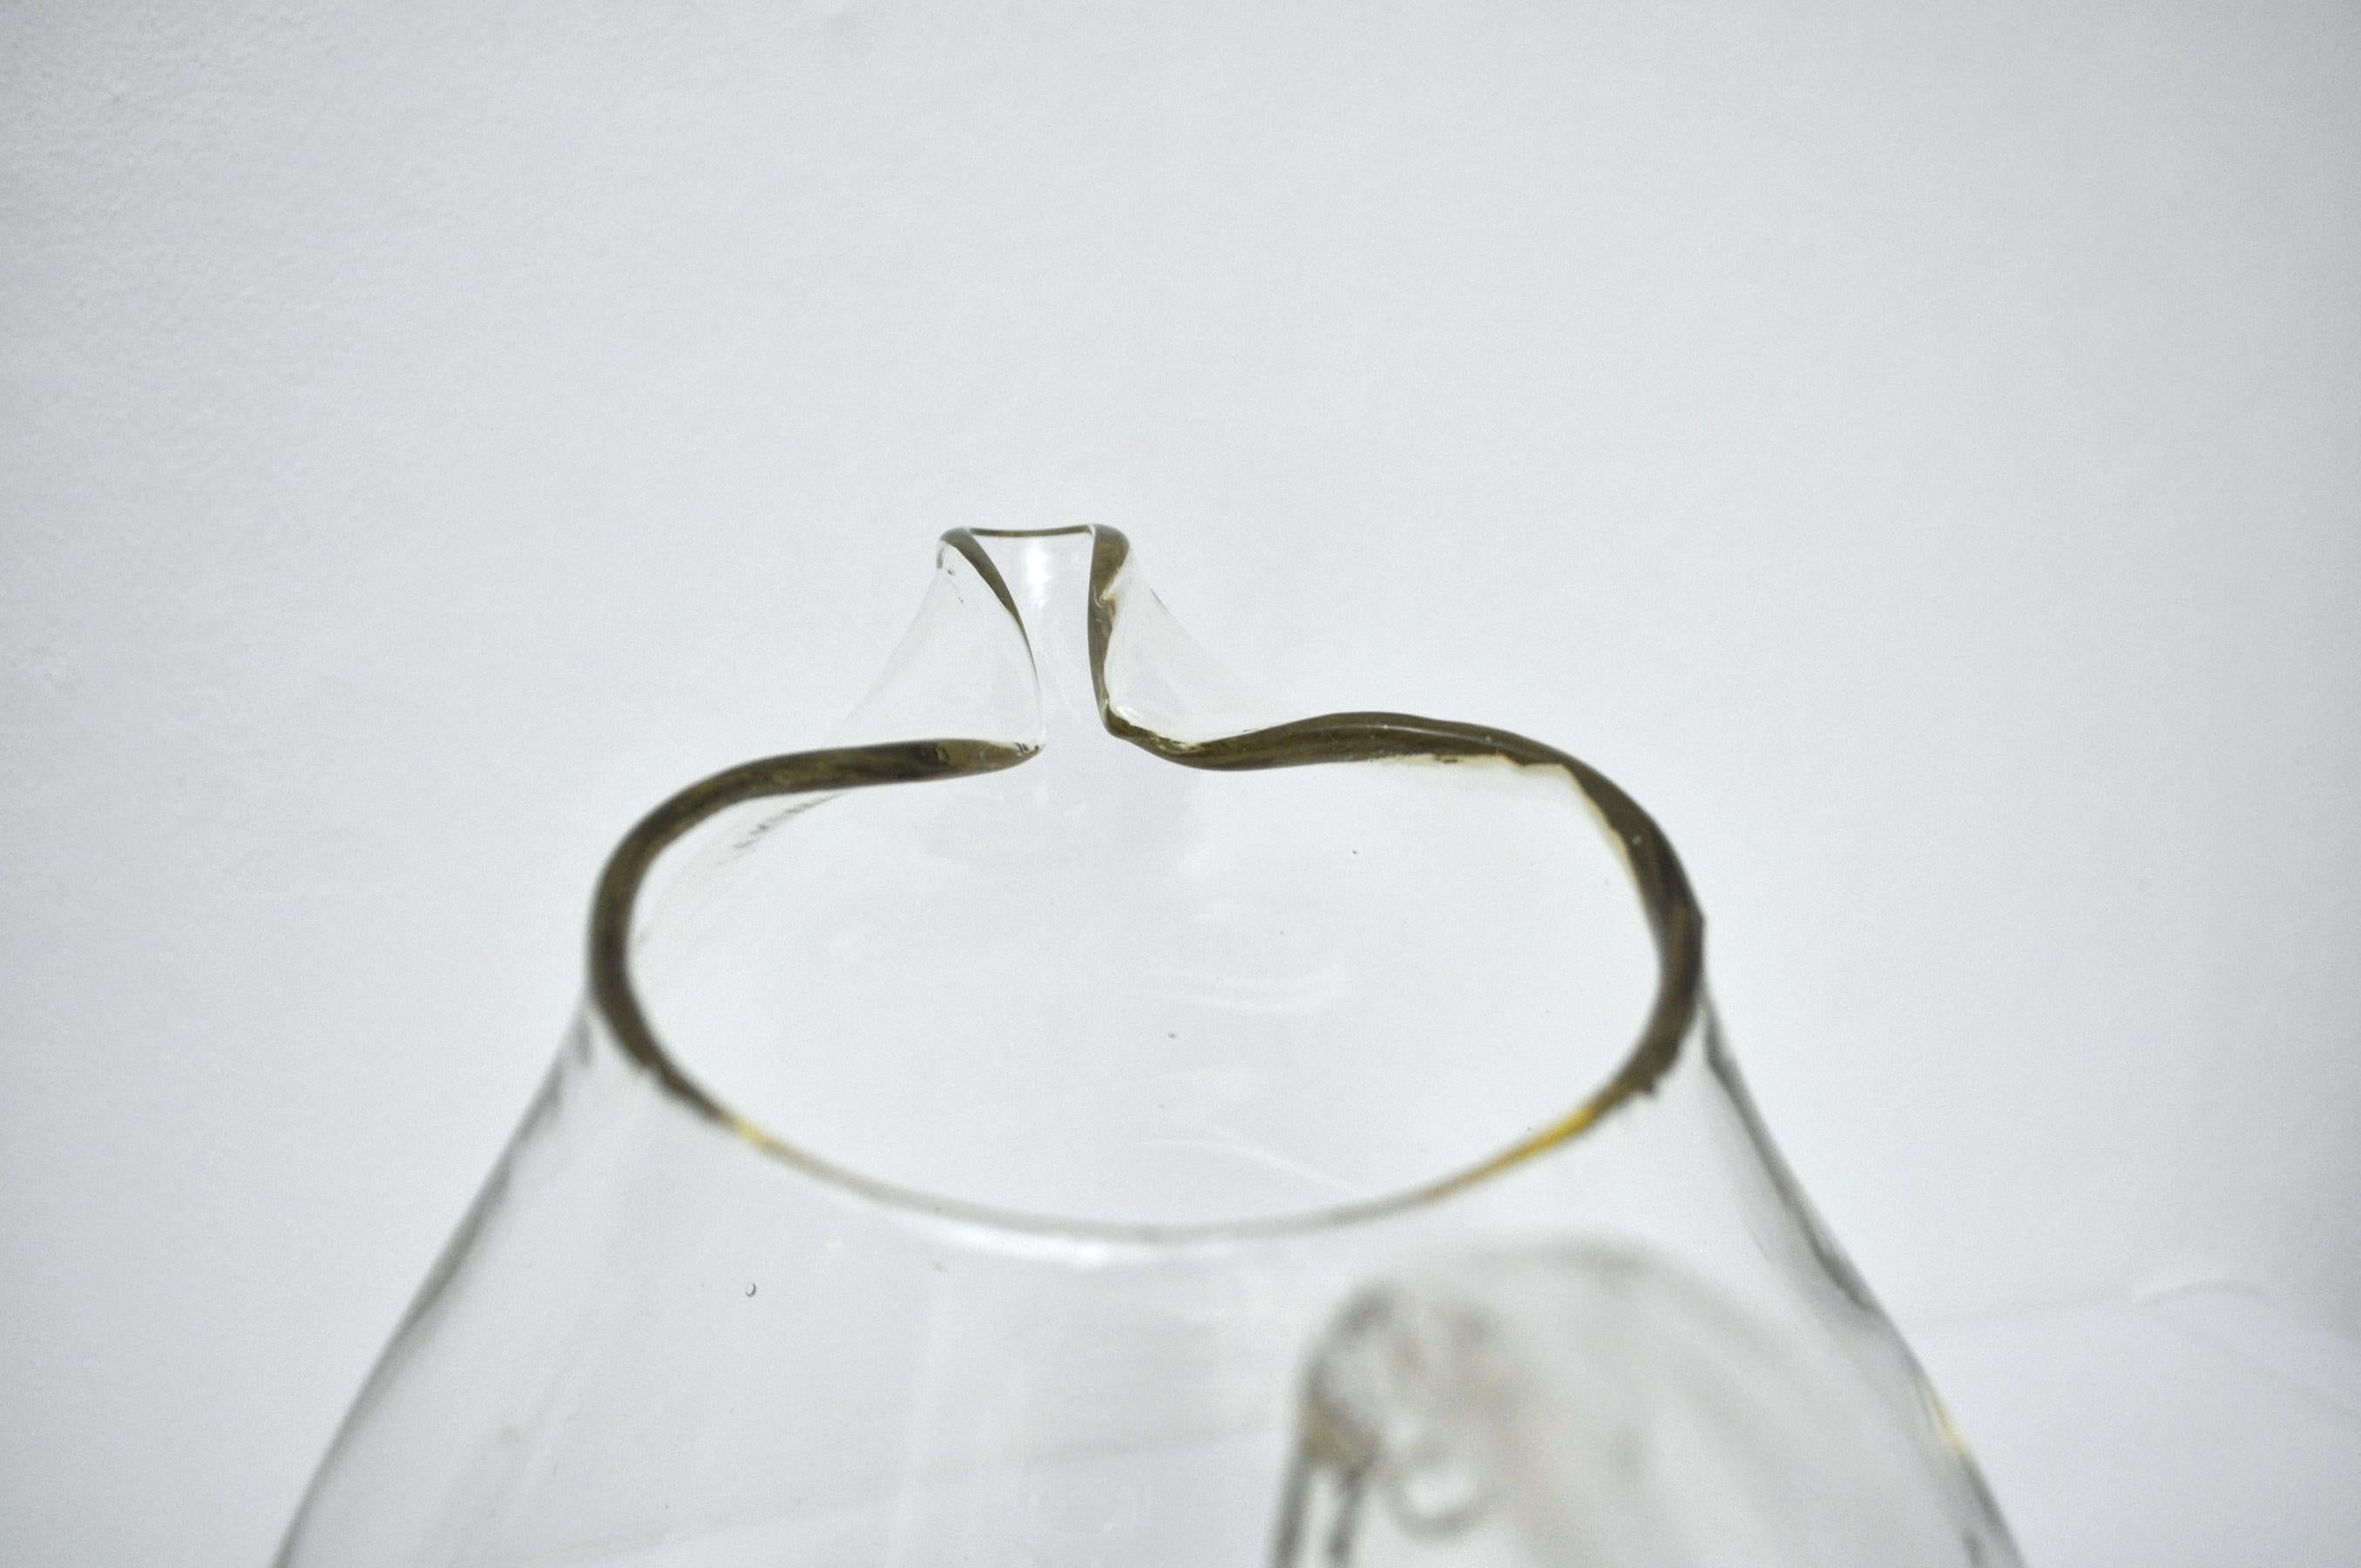 Blown Glass Large Scandinavian Modern Pitcher Attributed to Holmegaard by Per Lütken, 1950s For Sale